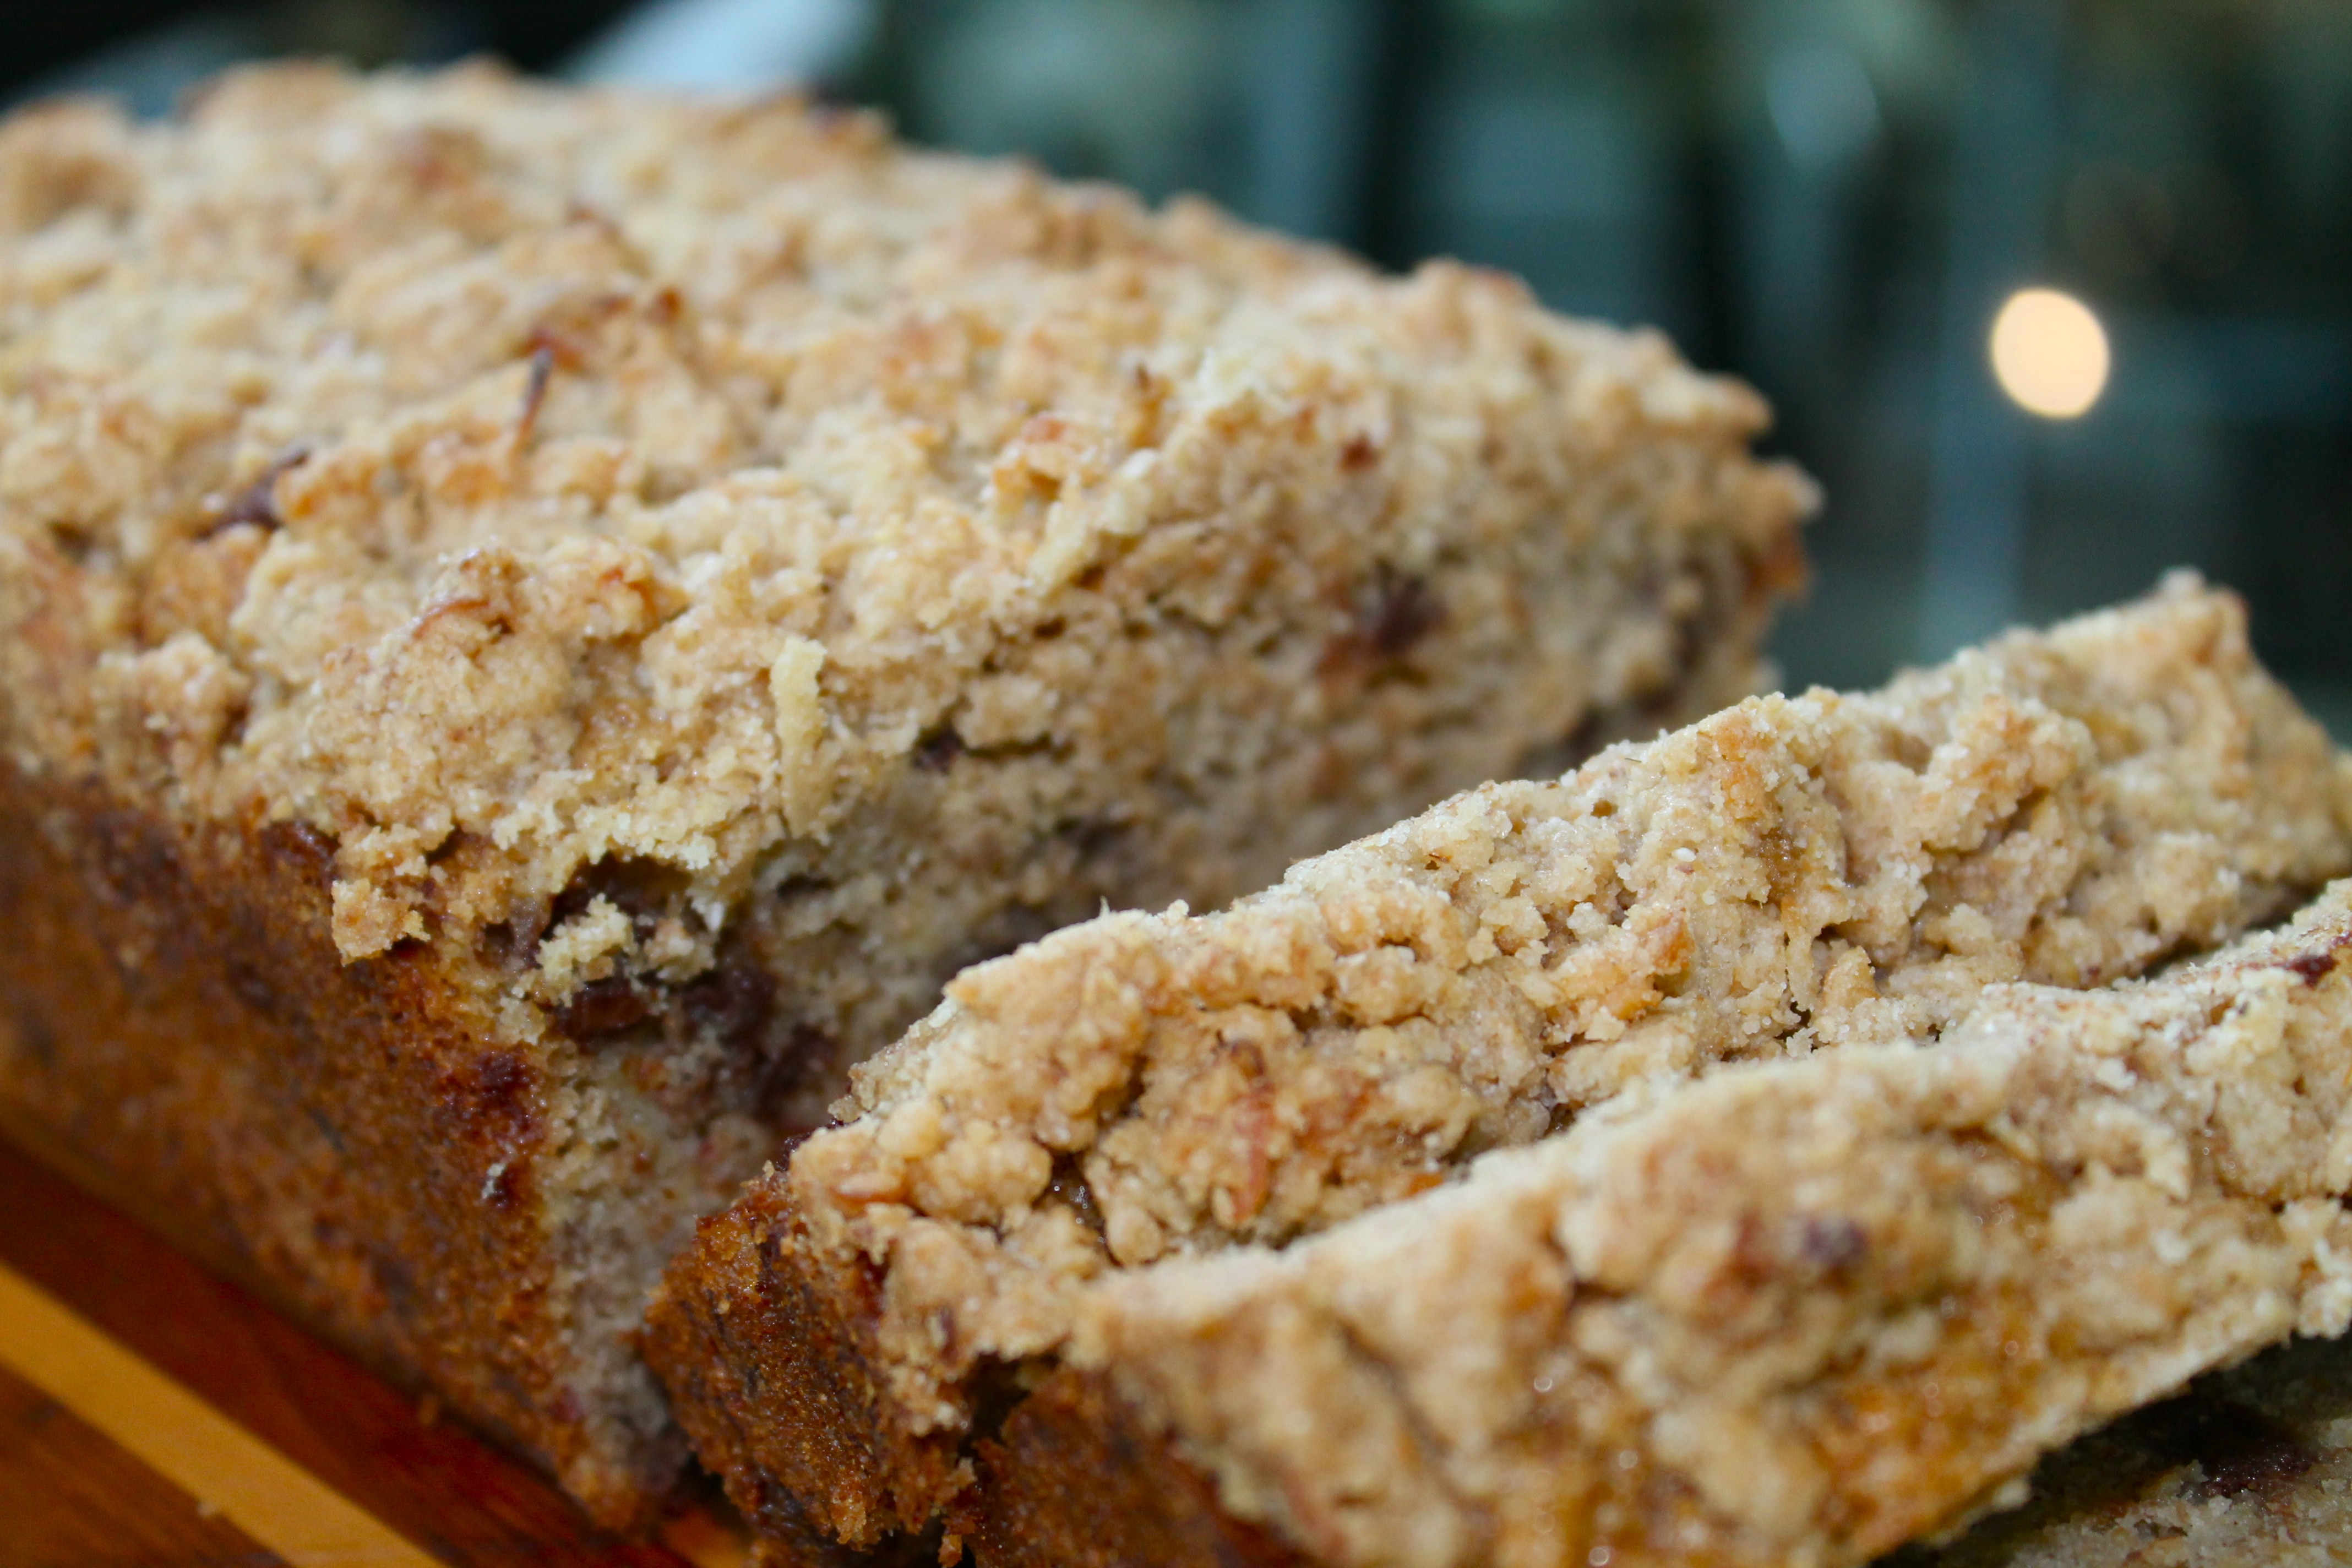 Brown Butter Chocolate Chip Banana Bread with Coconut Streusel